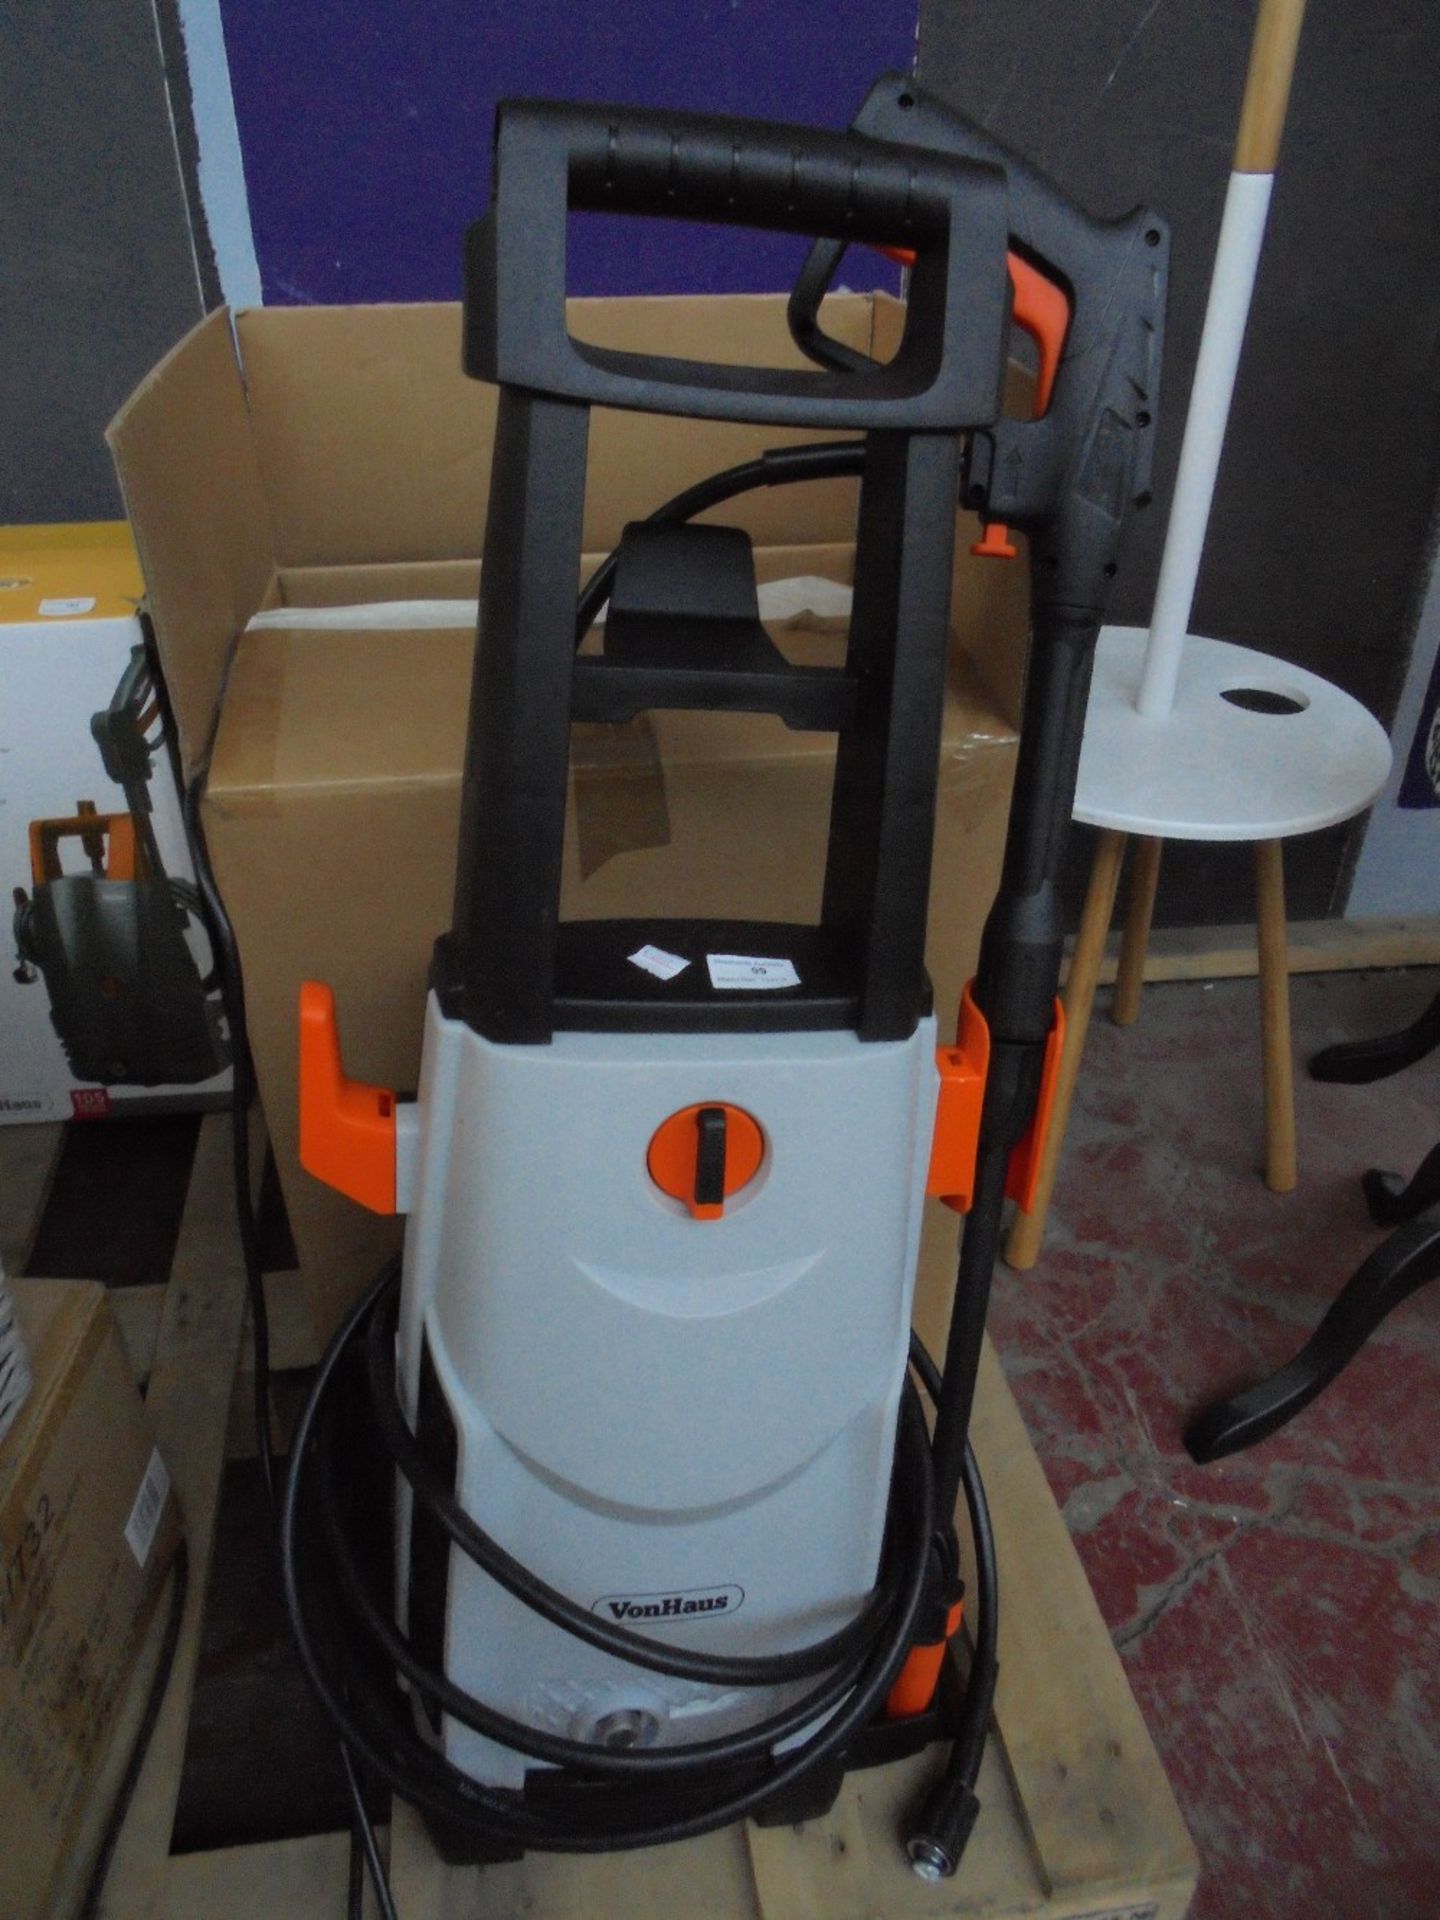 2000w Pressure Washer boxed unchecked Please note by Bidding on this item you agree to the following